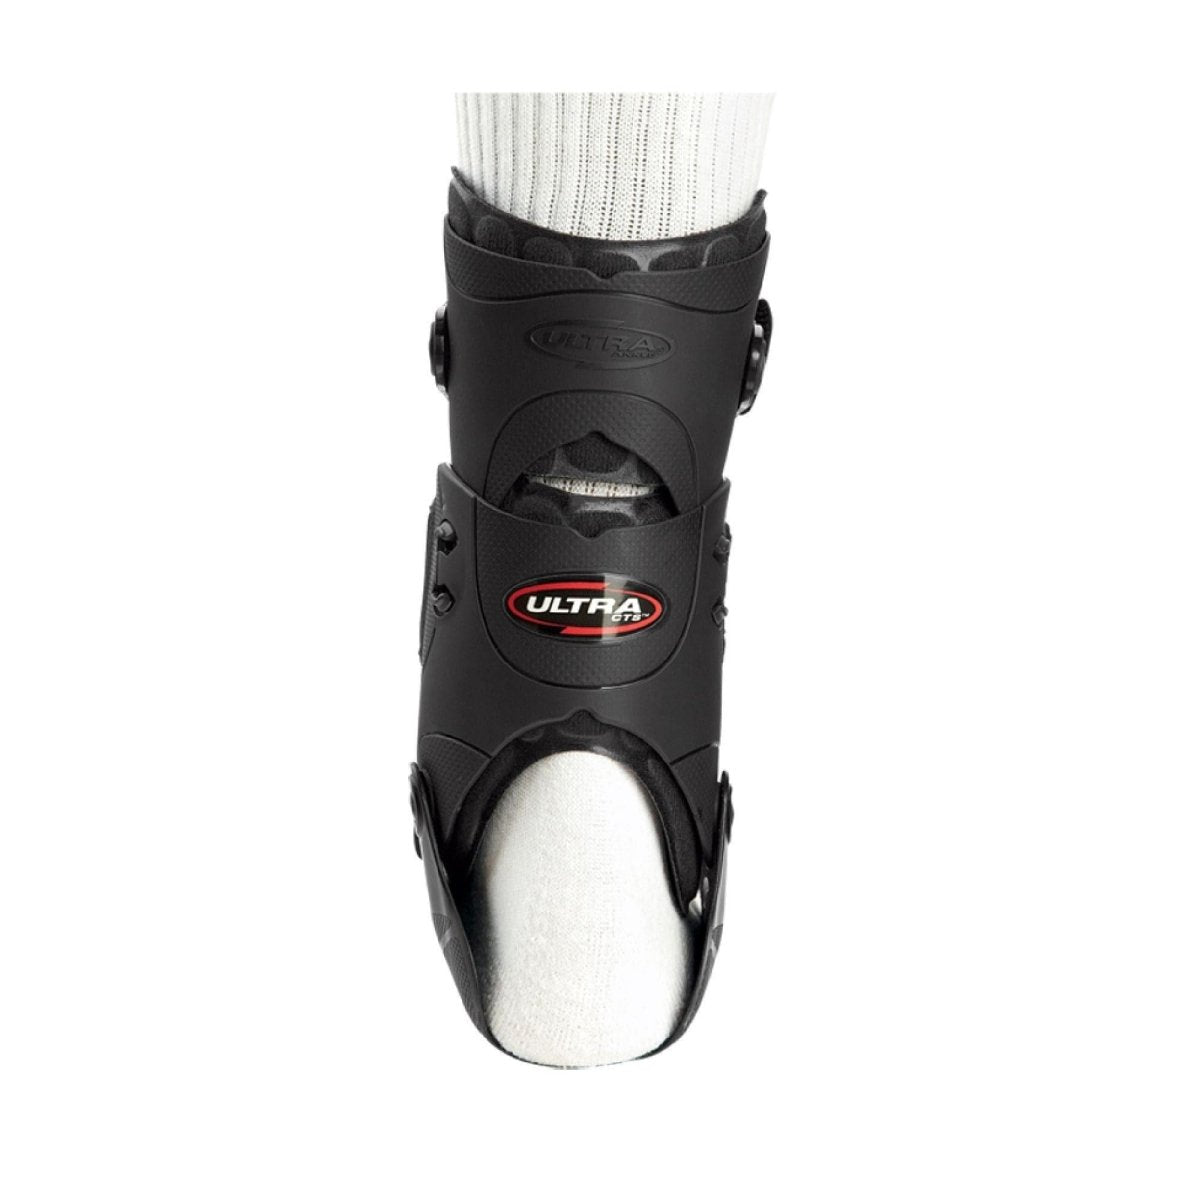 Breg Ultra CTS Ankle Brace for ankle recovery - BTS160-S-M - Brace Direct